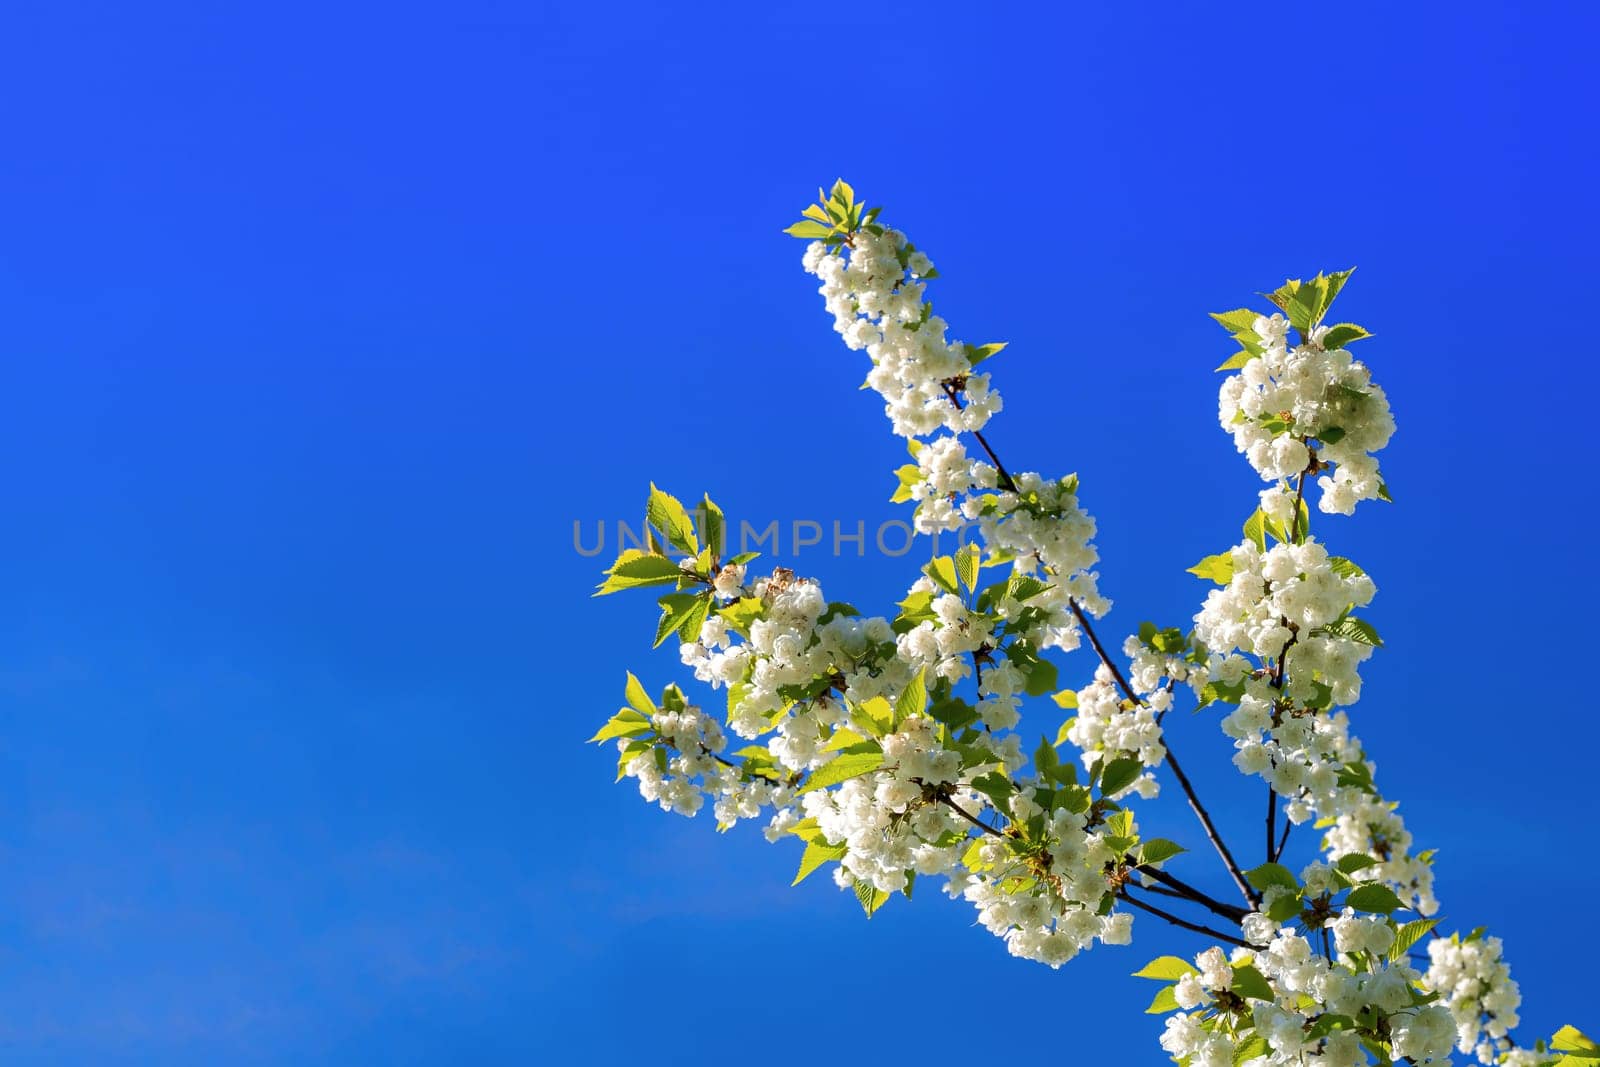 Branch with white blooming apple flowers on the background of the clear blue sky under bright sunlight - spring floral background. Tones correction. Soft focus processing